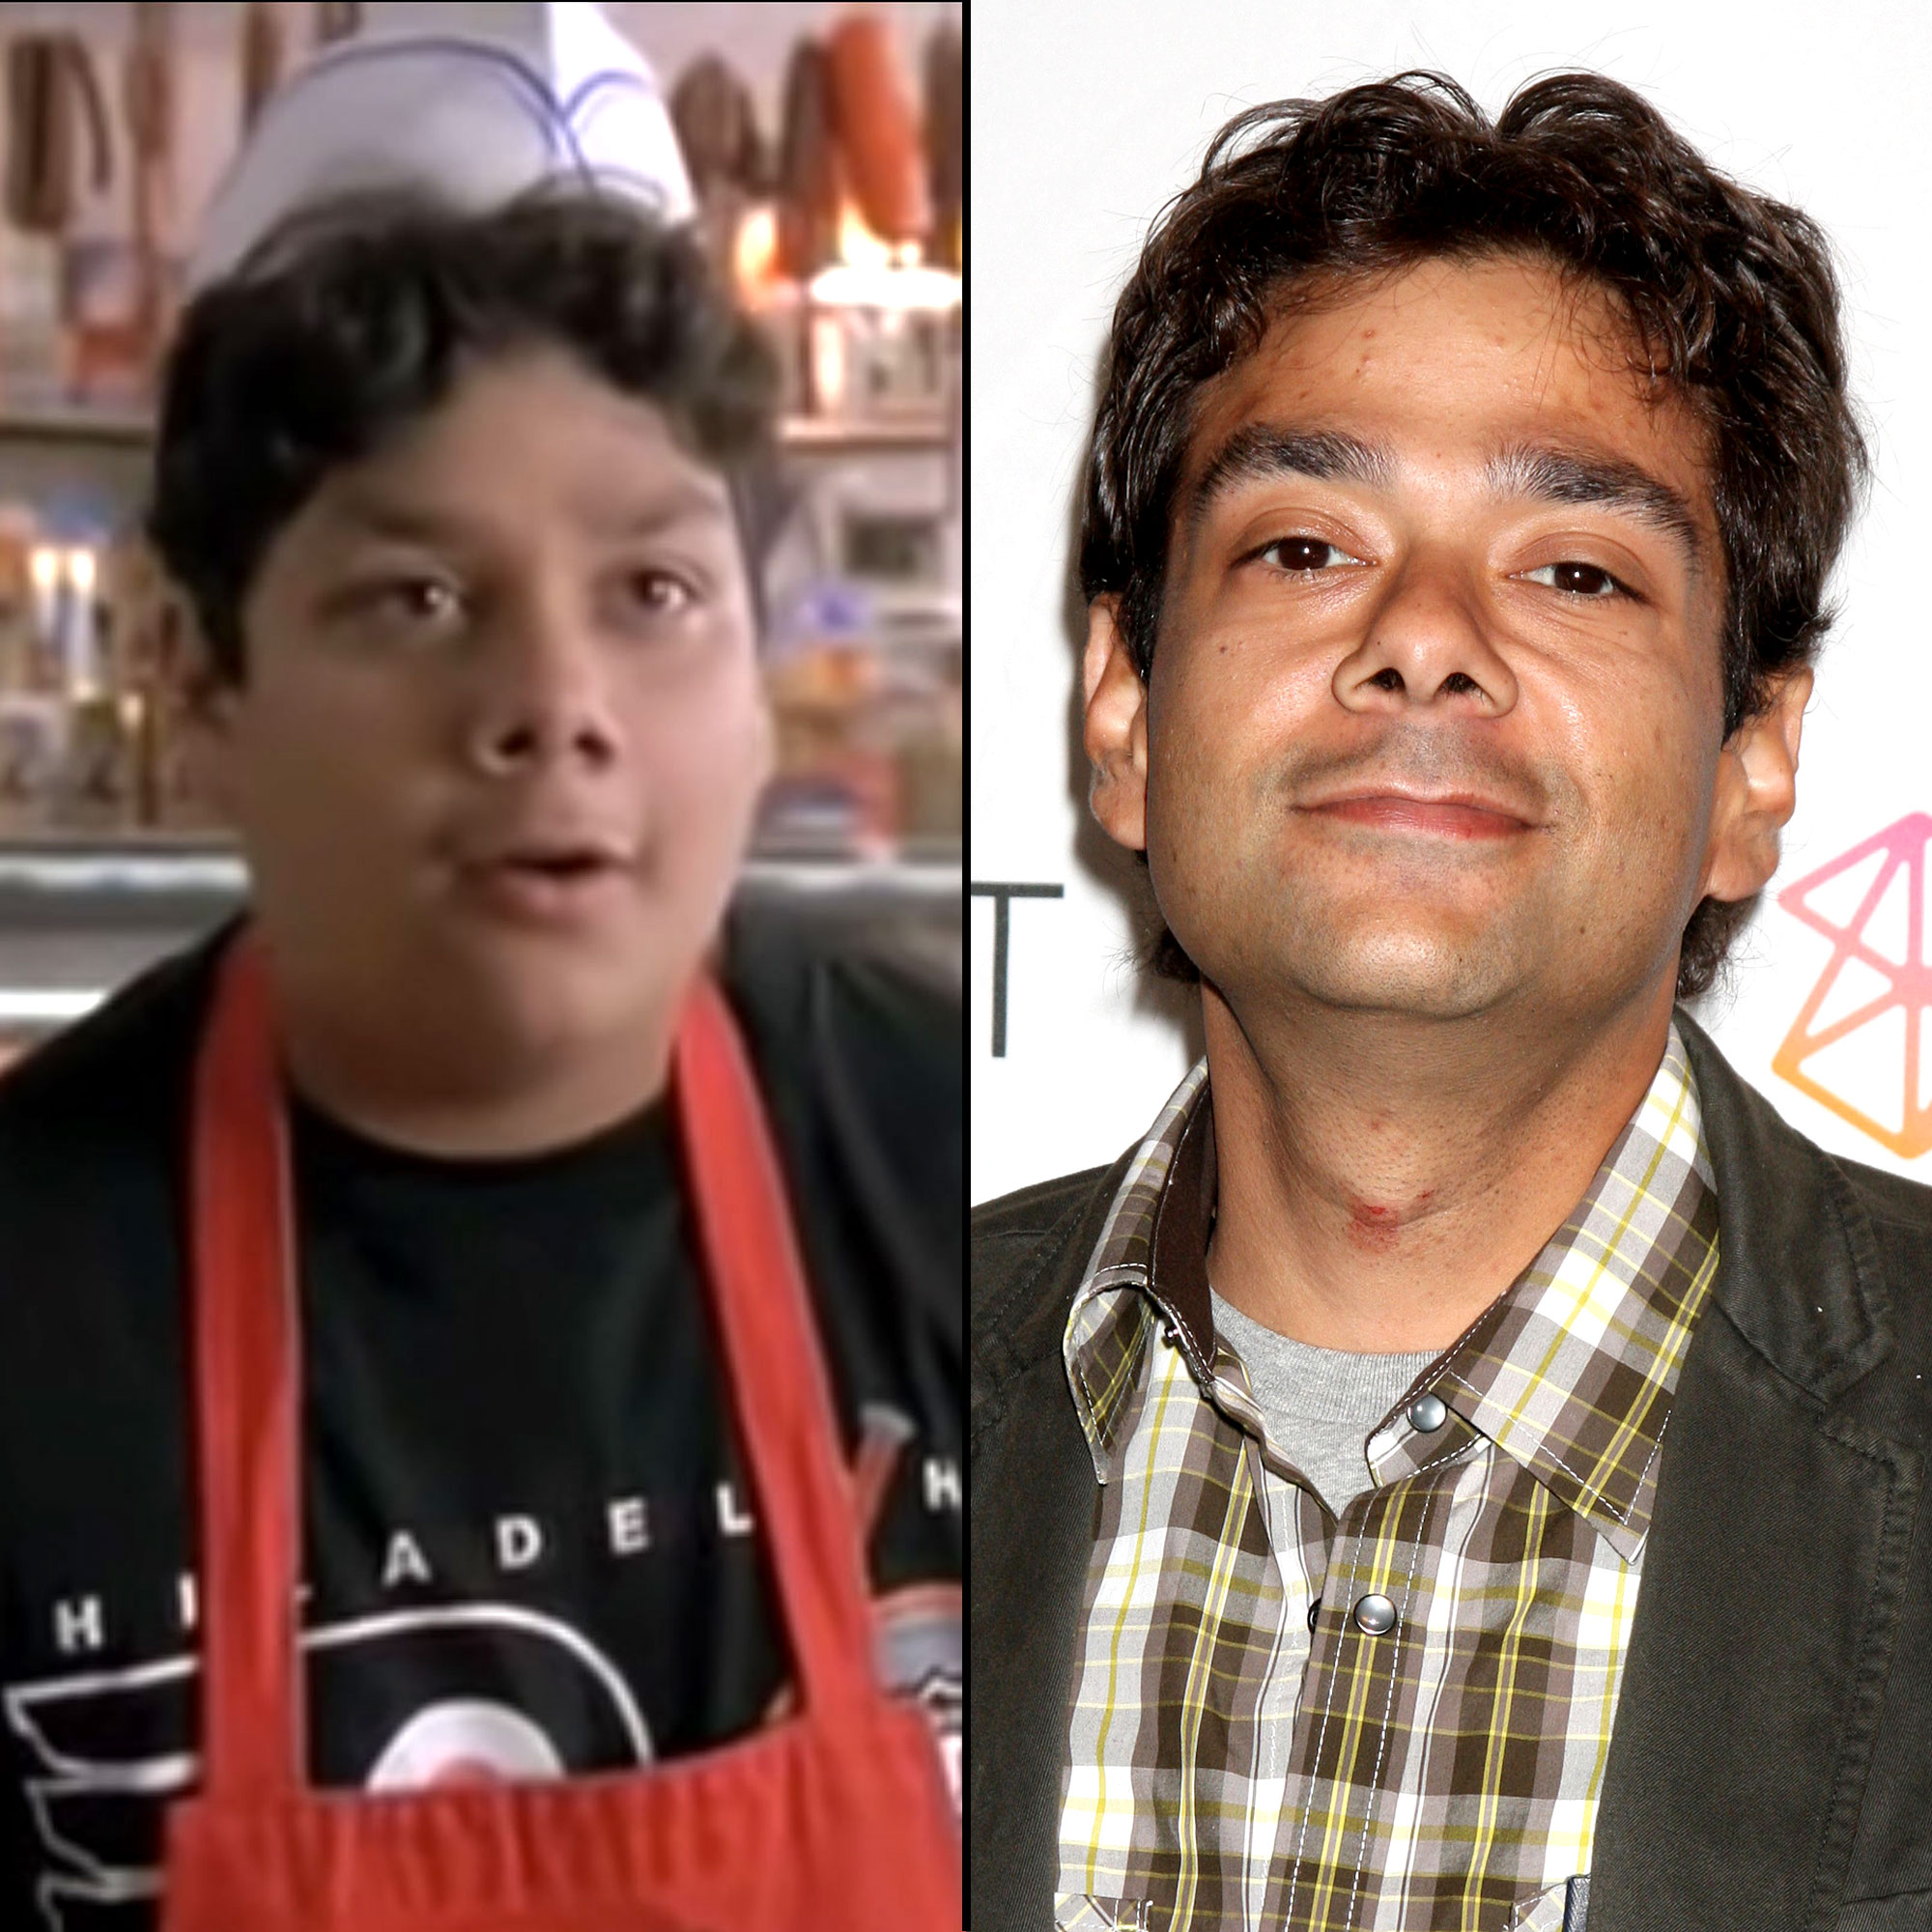 The Mighty Ducks Cast - Where Are They Now?